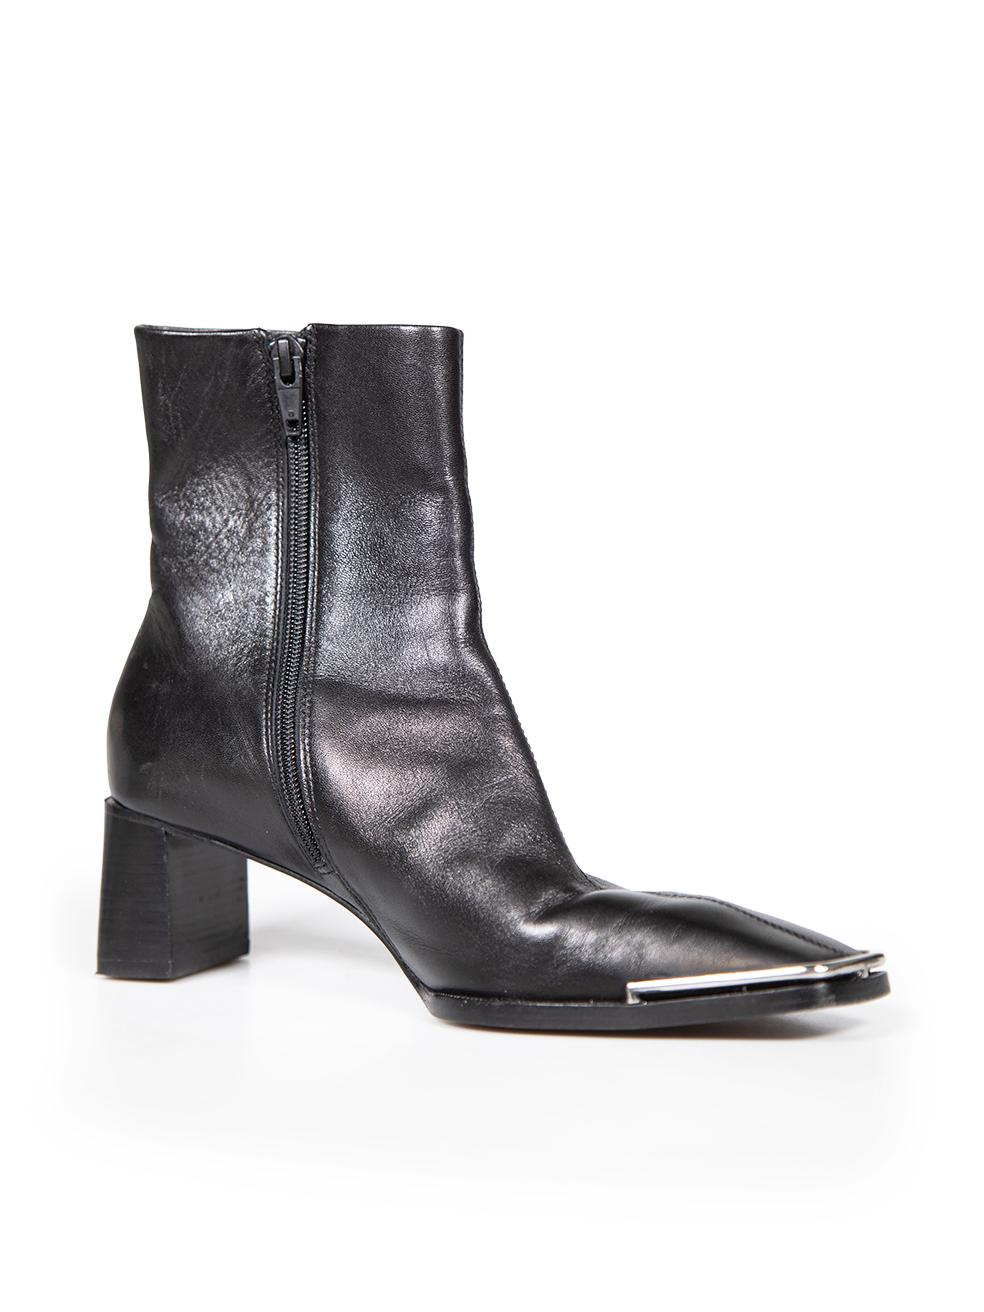 CONDITION is Very good. Minimal wear to boots is evident. Minimal scratches to the top area, sides and back of both shoes. Small tarnishing to the left hardware and abrasions to the tip of both shoes on this used Alexander Wang designer resale